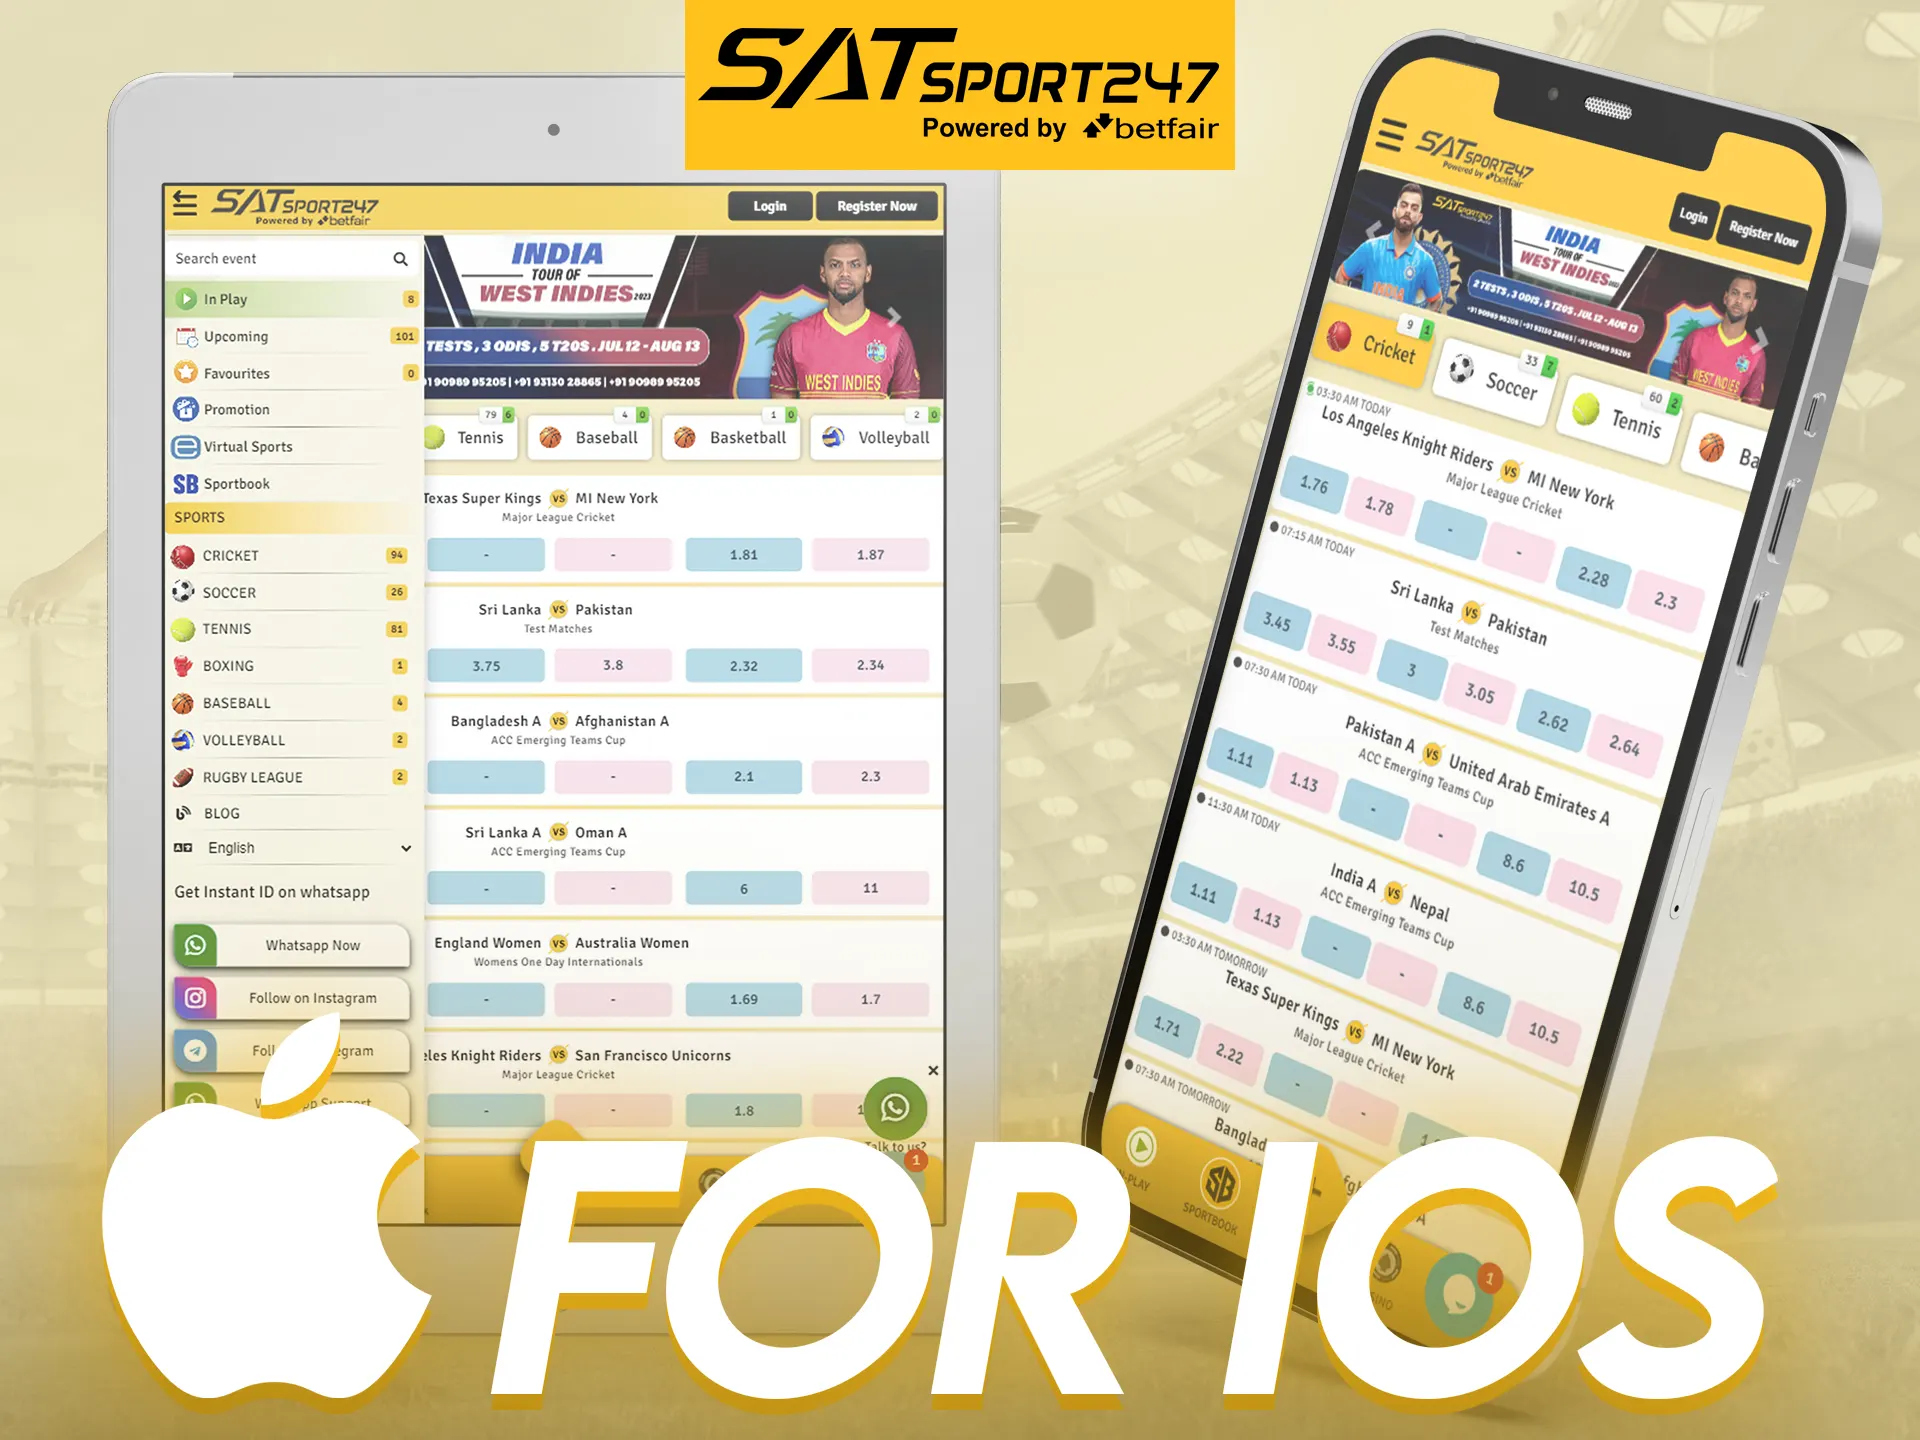 Satsport247 app can be installed on your iOS phone.